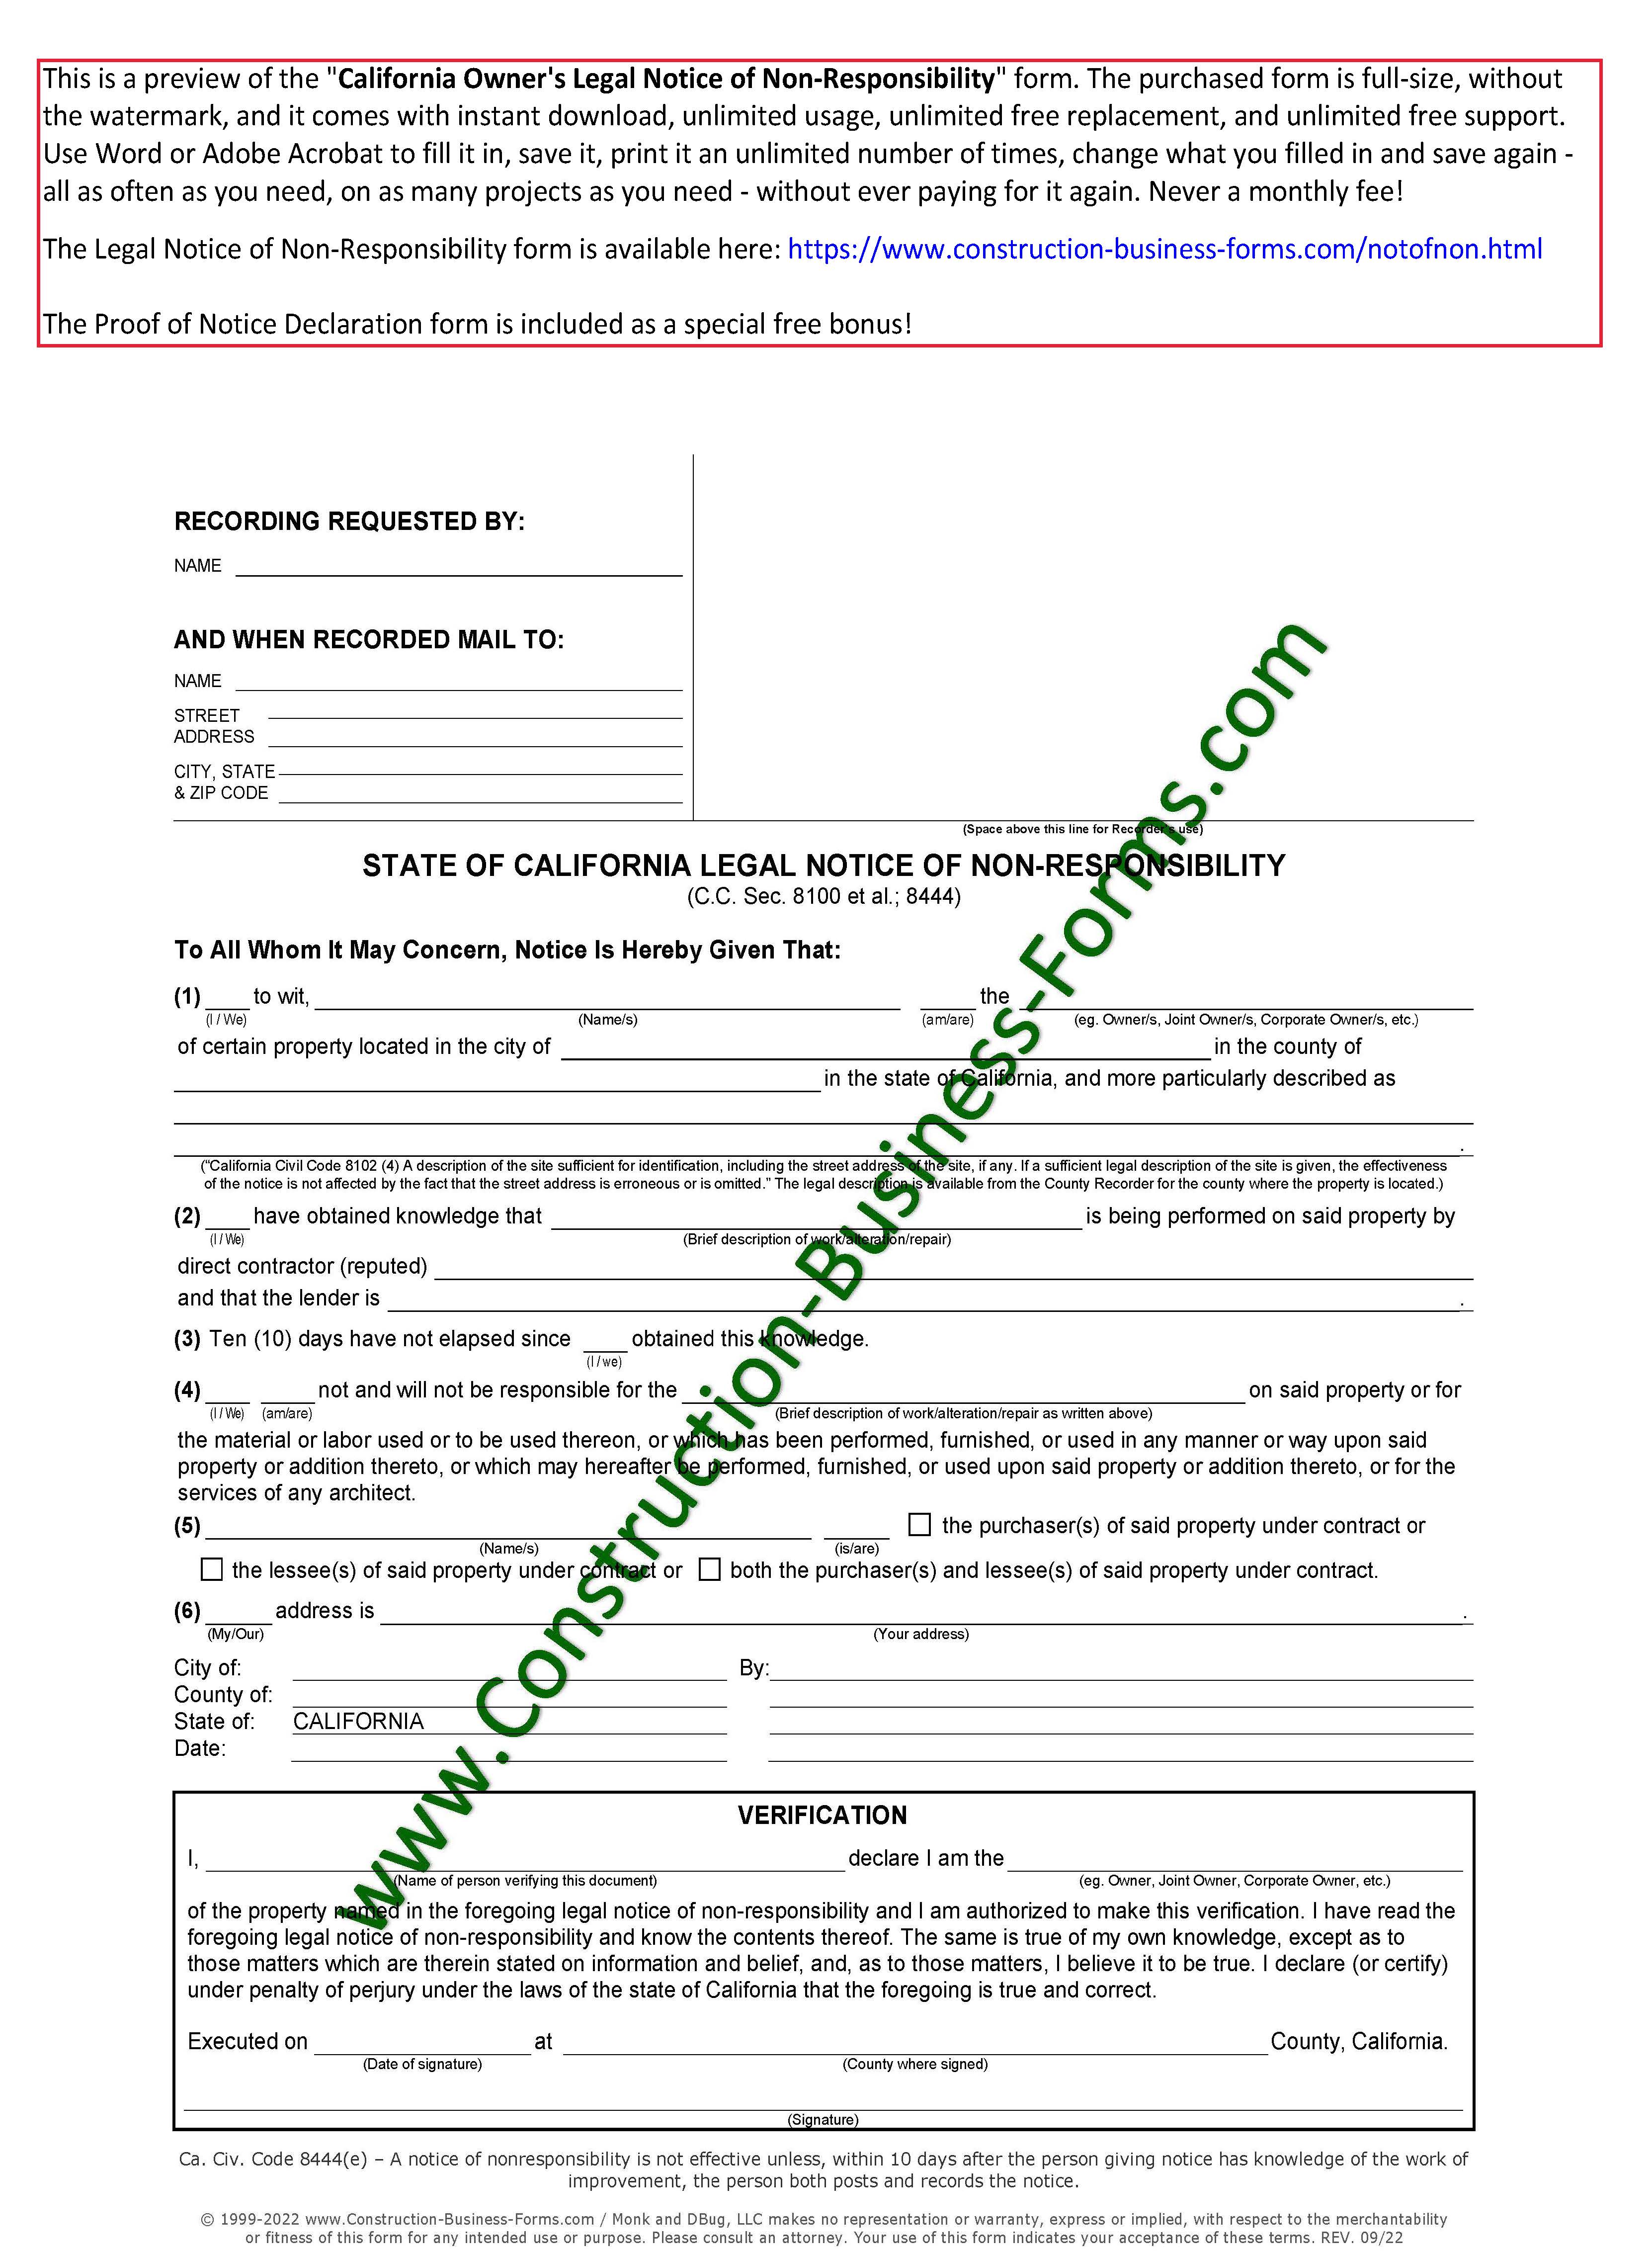 California Owner's Notice of Non-Responsibility Form